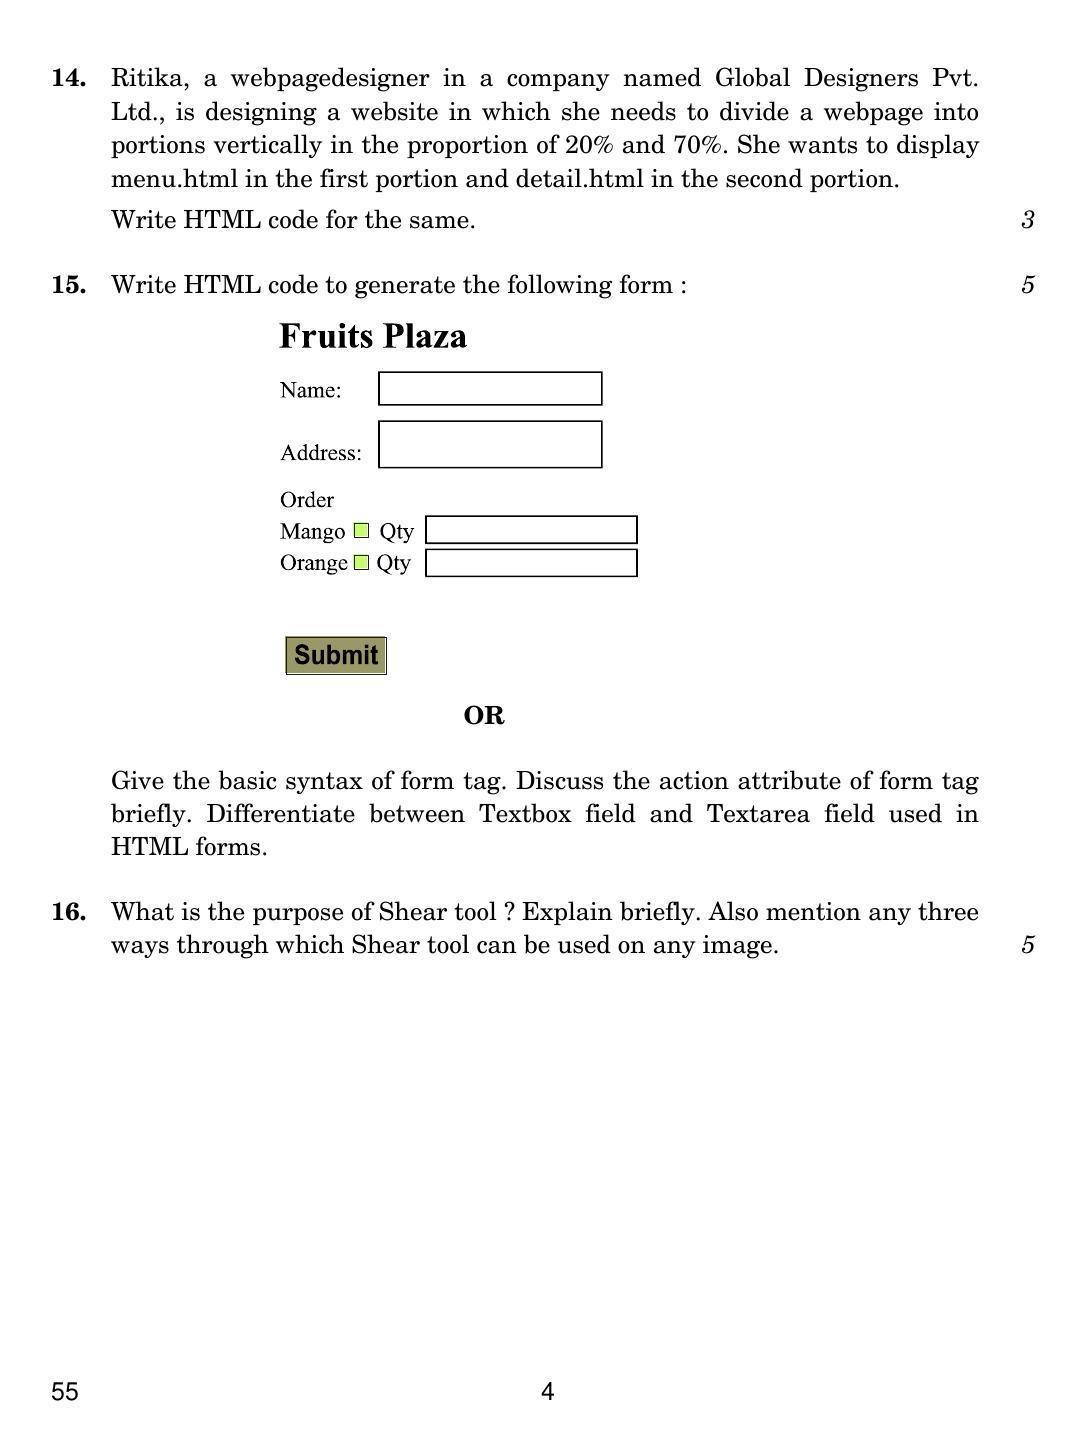 CBSE Class 10 55 INFORMATION AND COMMUNICATION TECHNOLOGY (ICT) 2019 Question Paper - Page 4